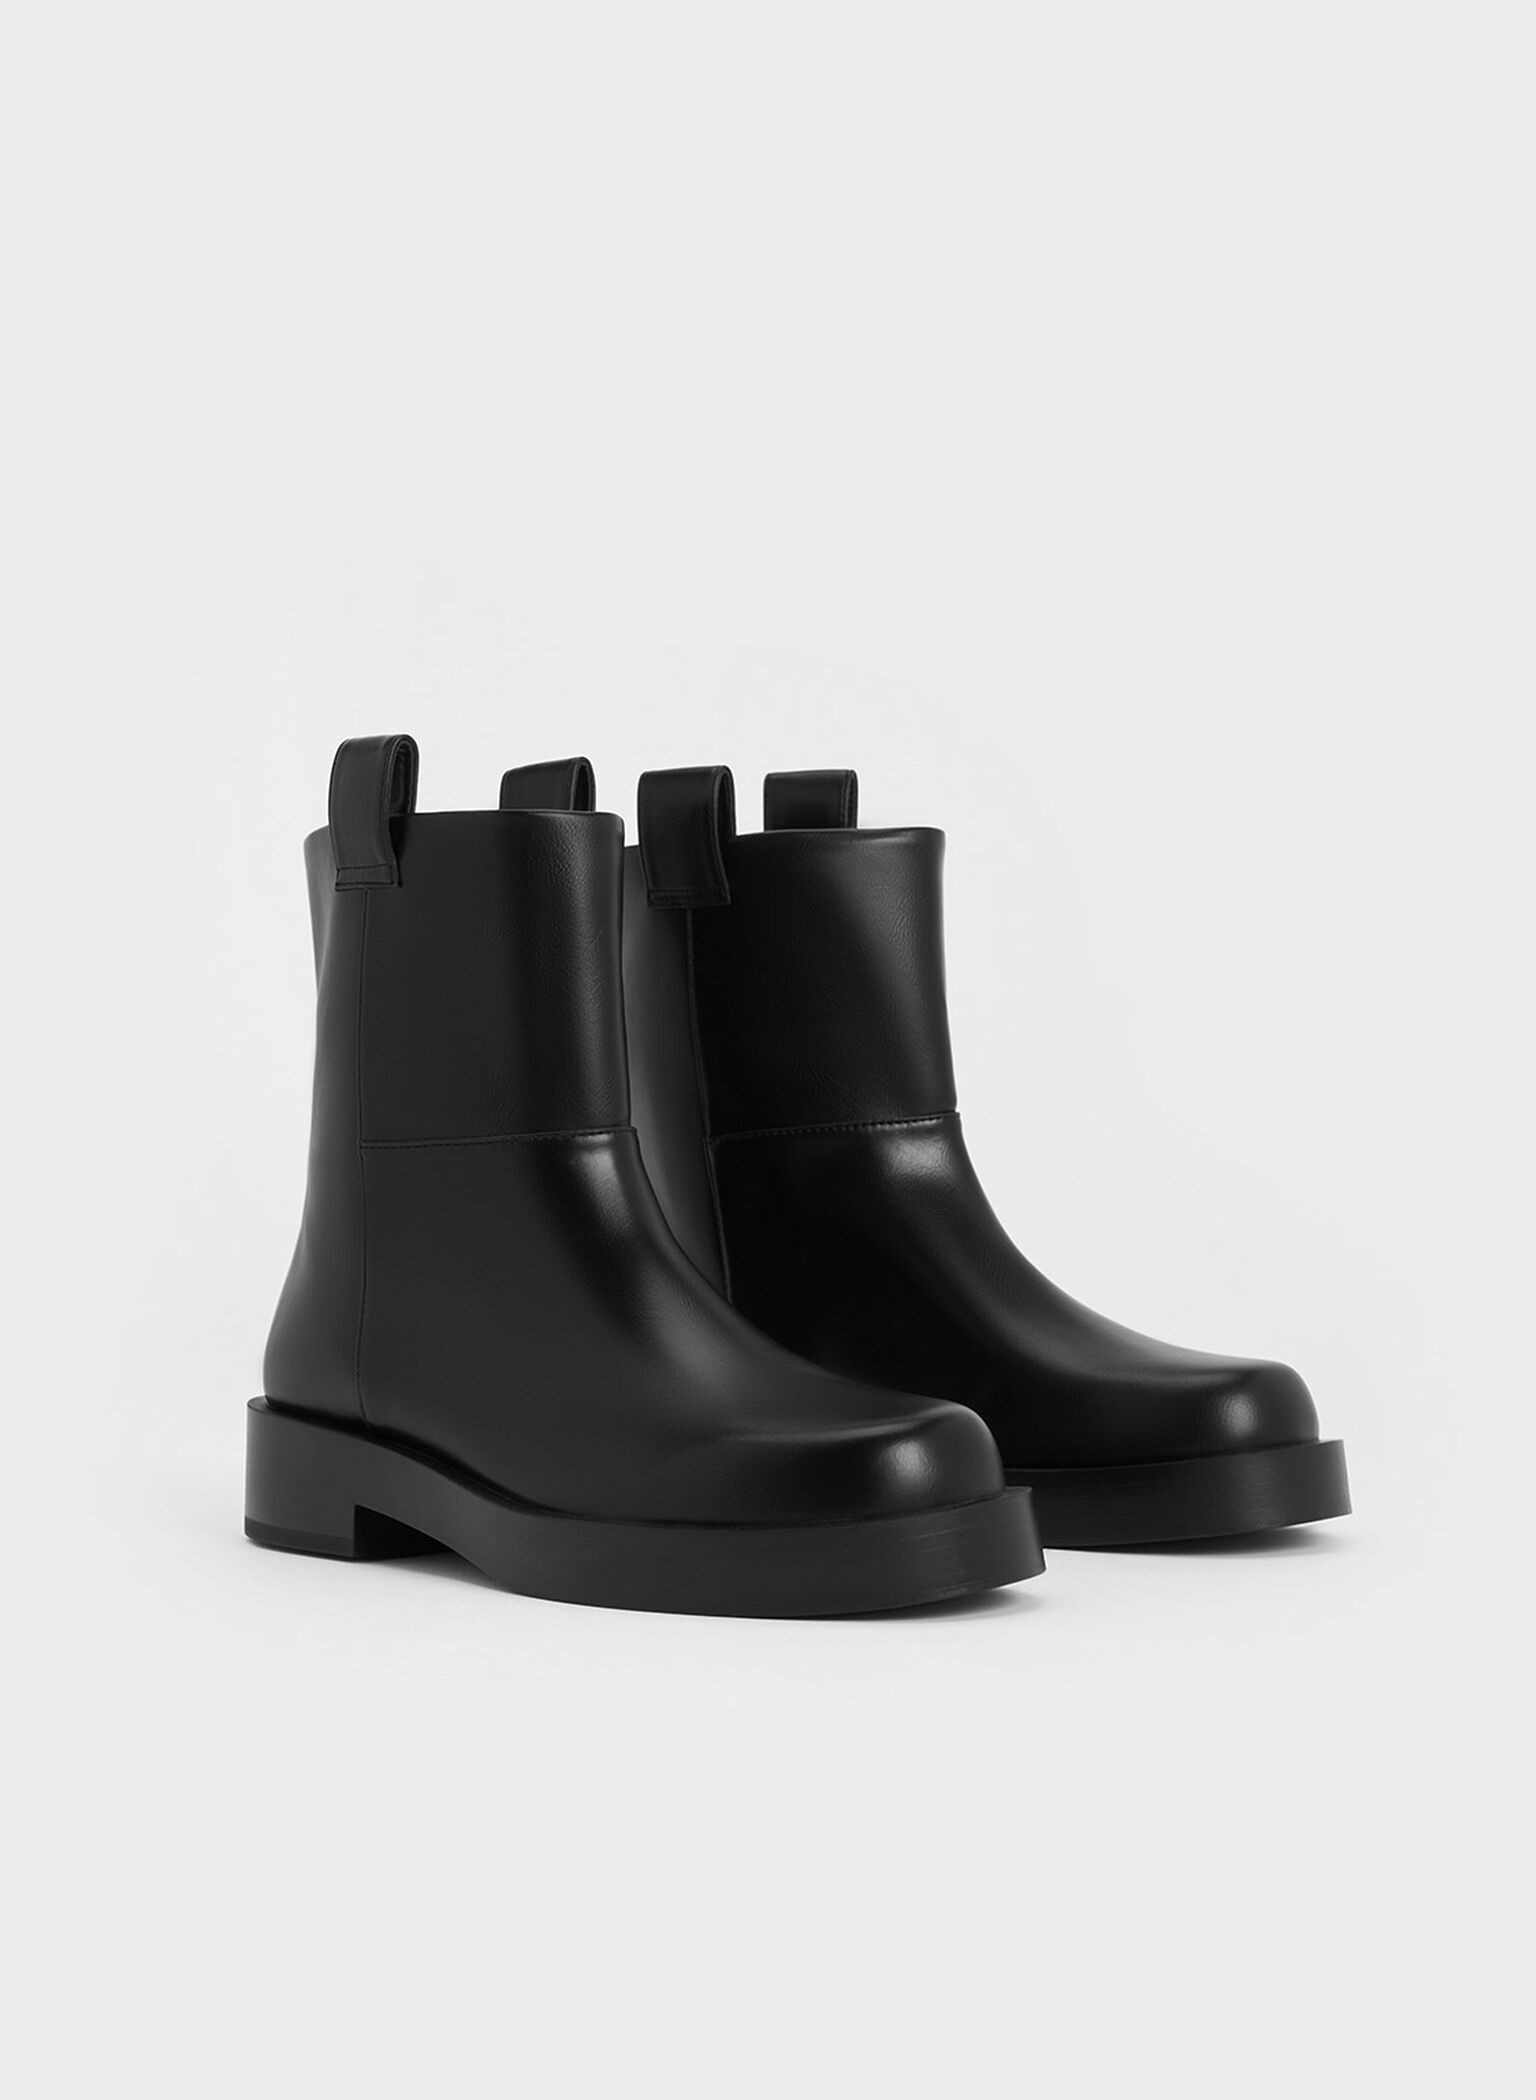 Double Pull-Tab Ankle Boots, Black, hi-res